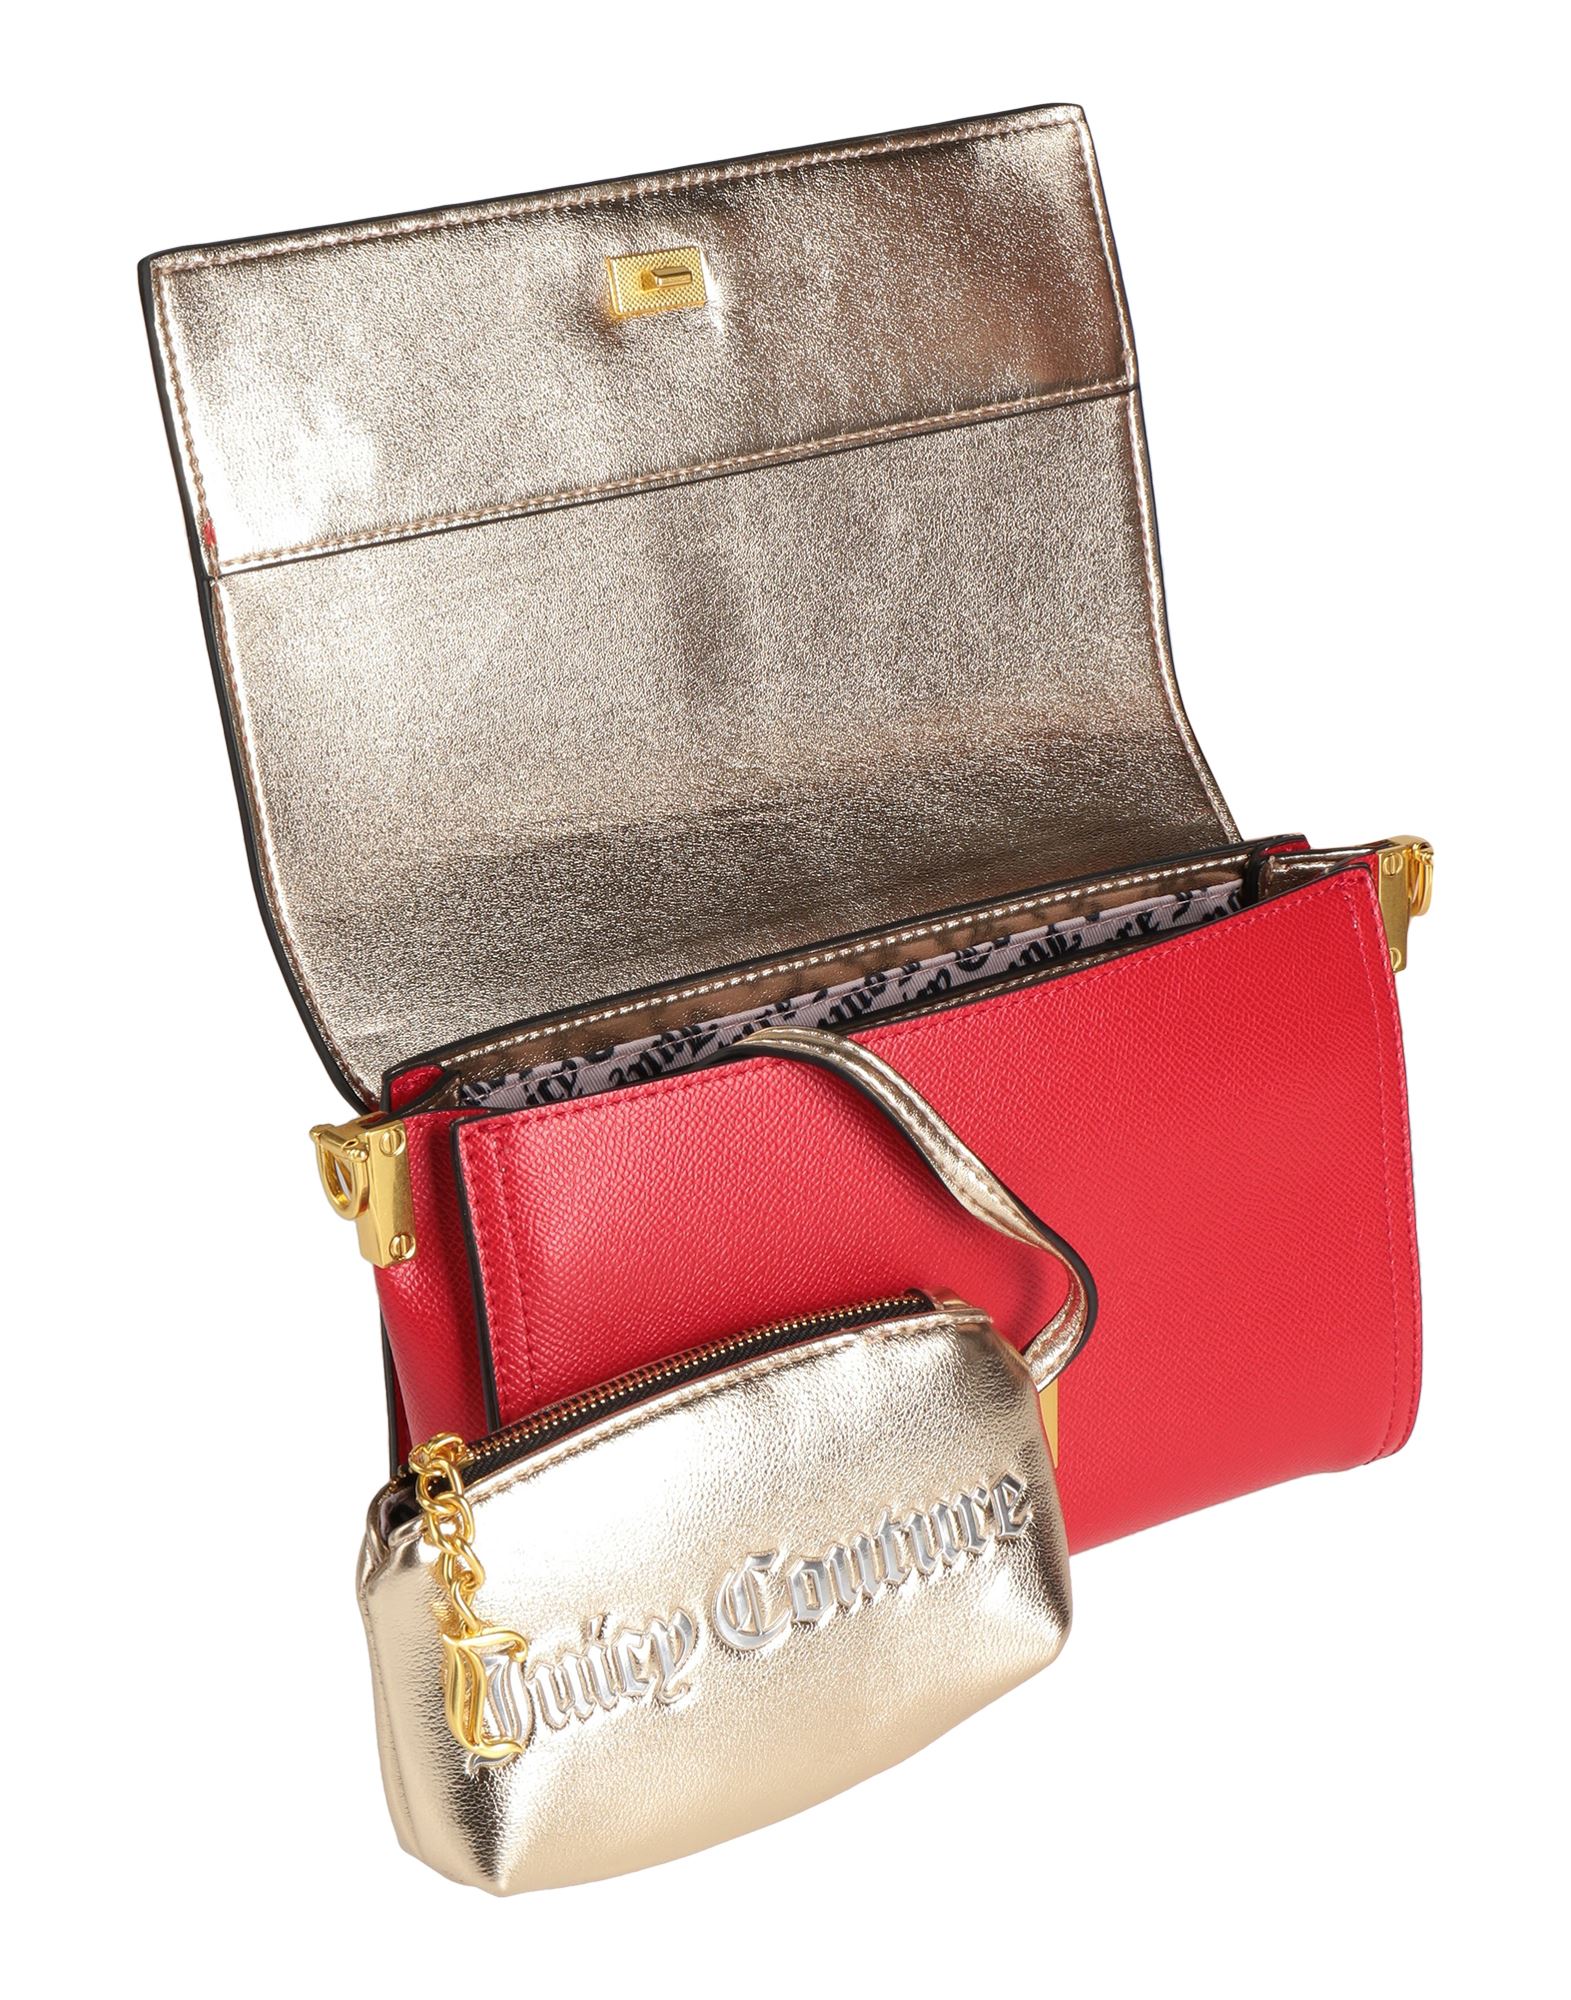 Juicy Couture Handbags In Red